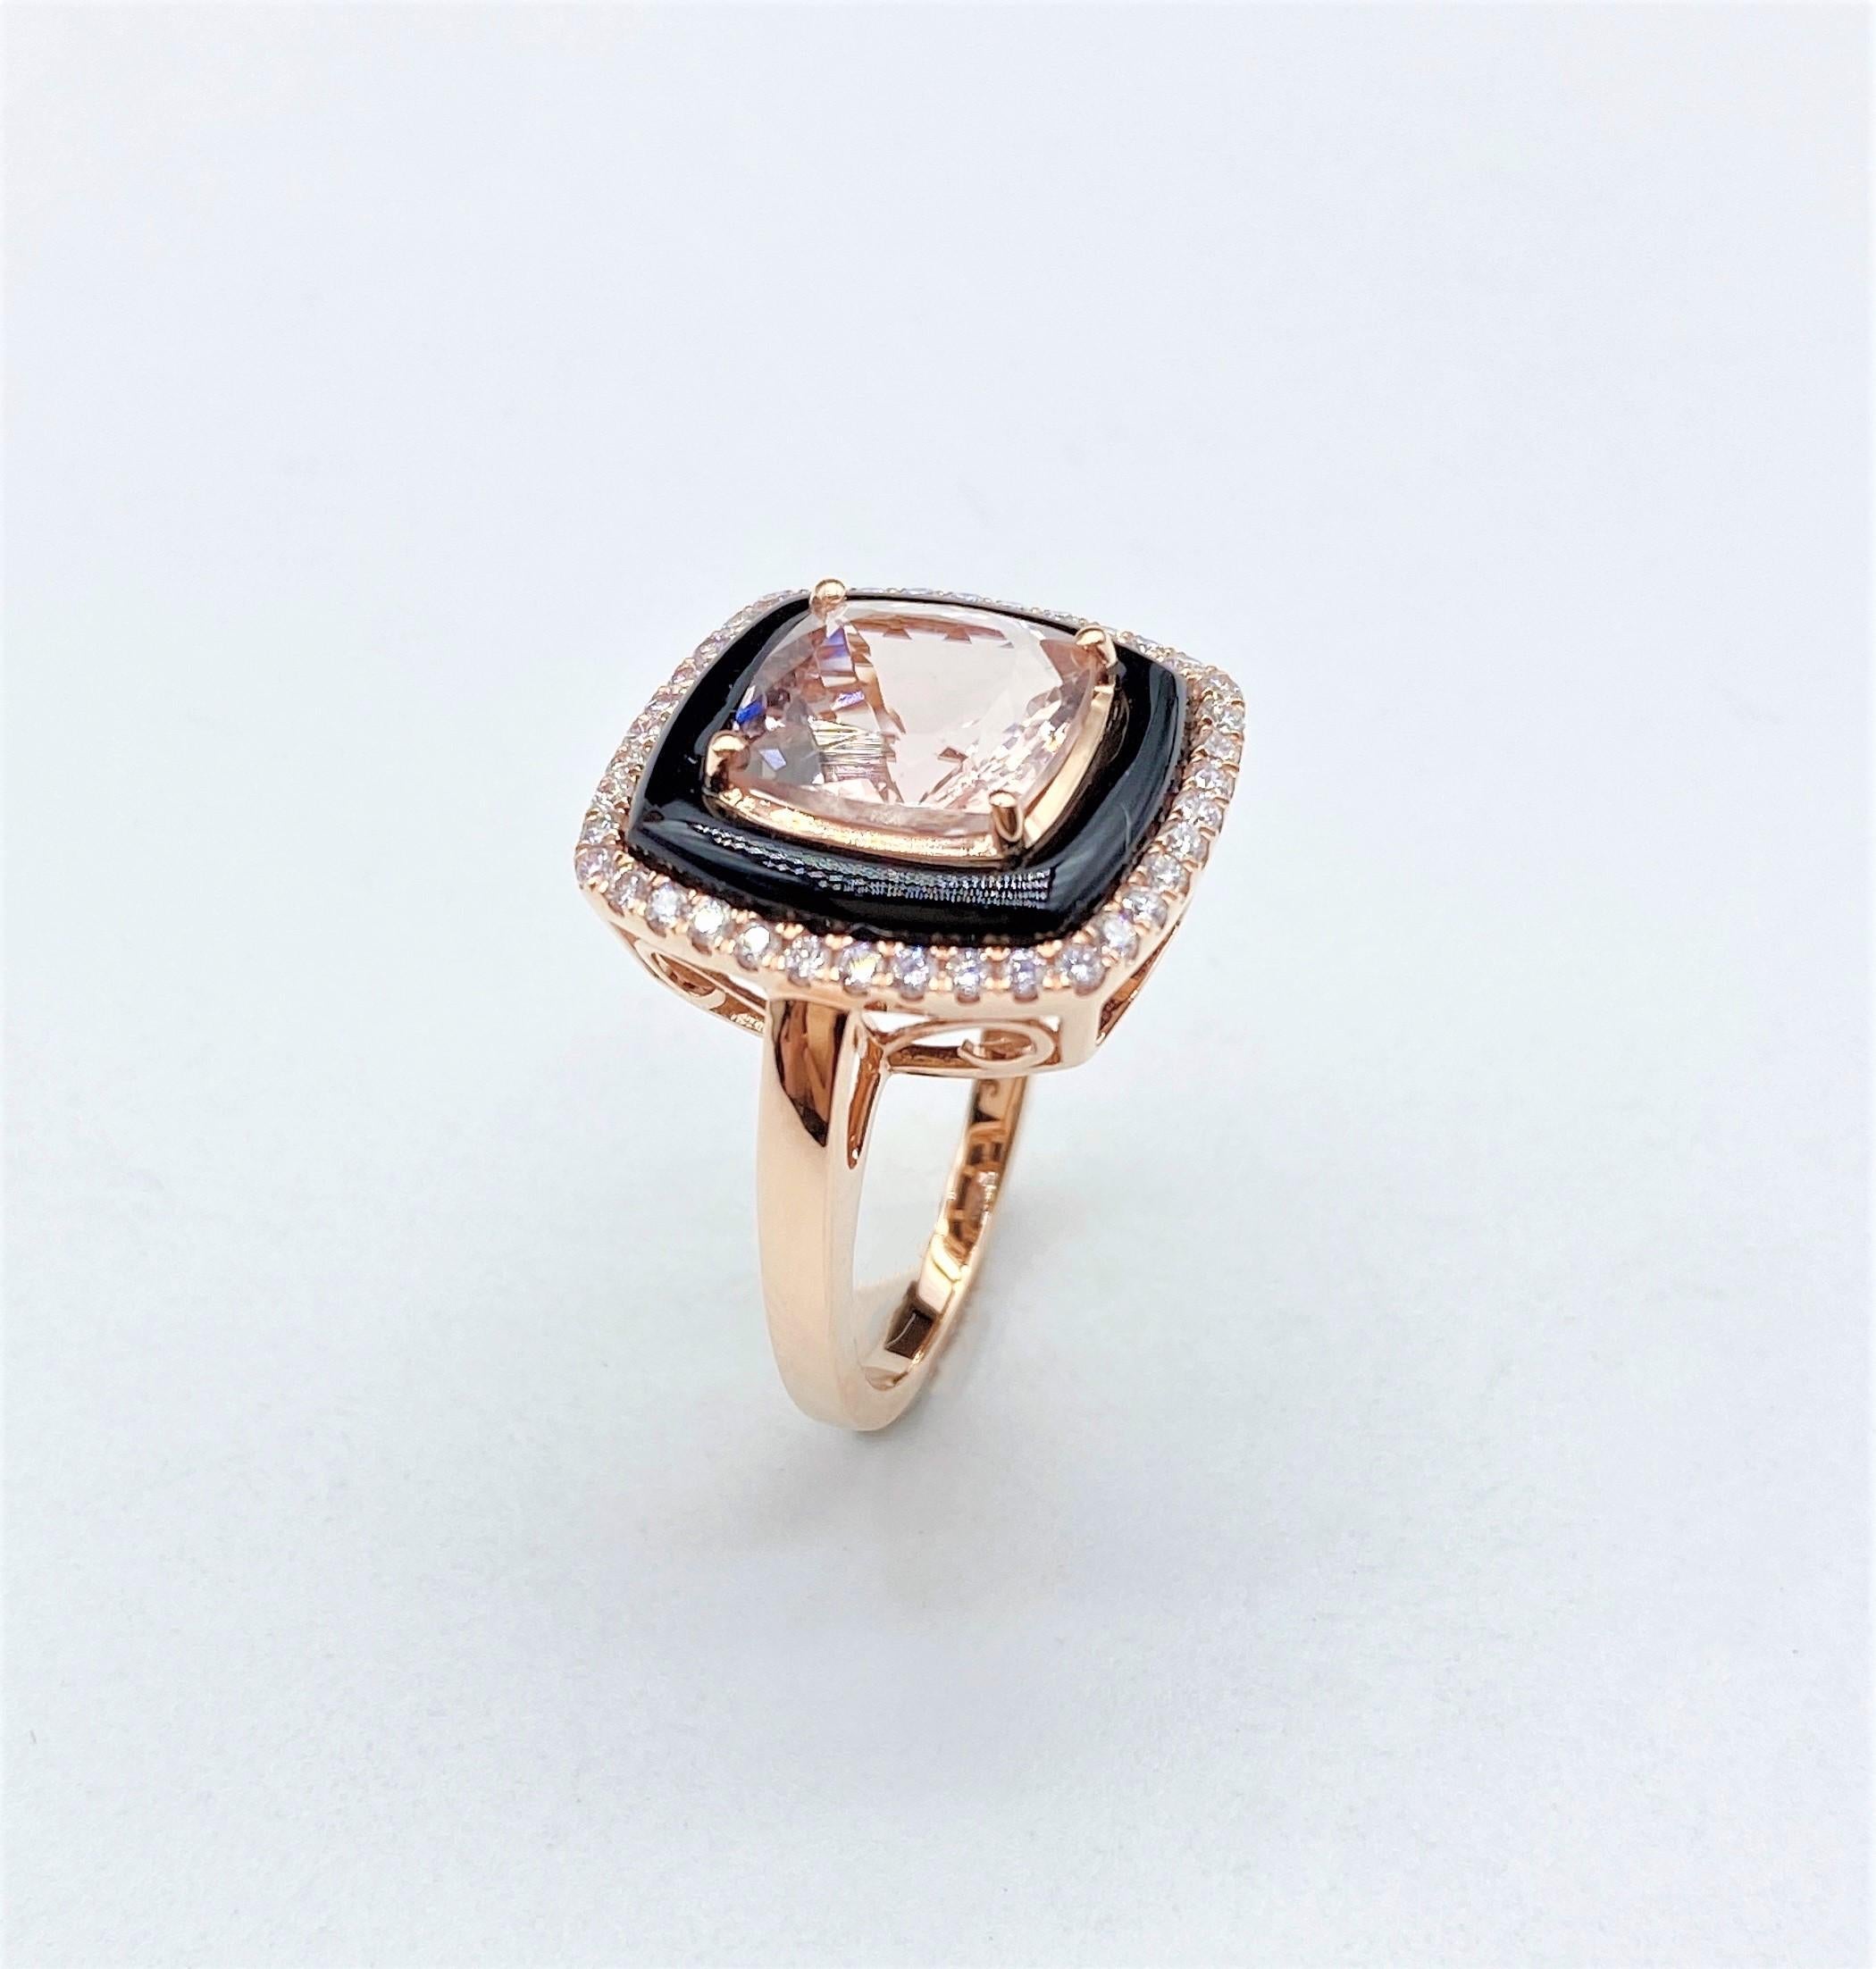 The Following Item we are offering is this Rare Important Radiant 18KT Gold Gorgeous Glittering and Sparkling Magnificent Fancy Cut Morganite and Onyx Diamond Ring. Ring Contains approx 5CTS of Beautiful Fancy Morganite, Diamonds and Onyx!!! Stones